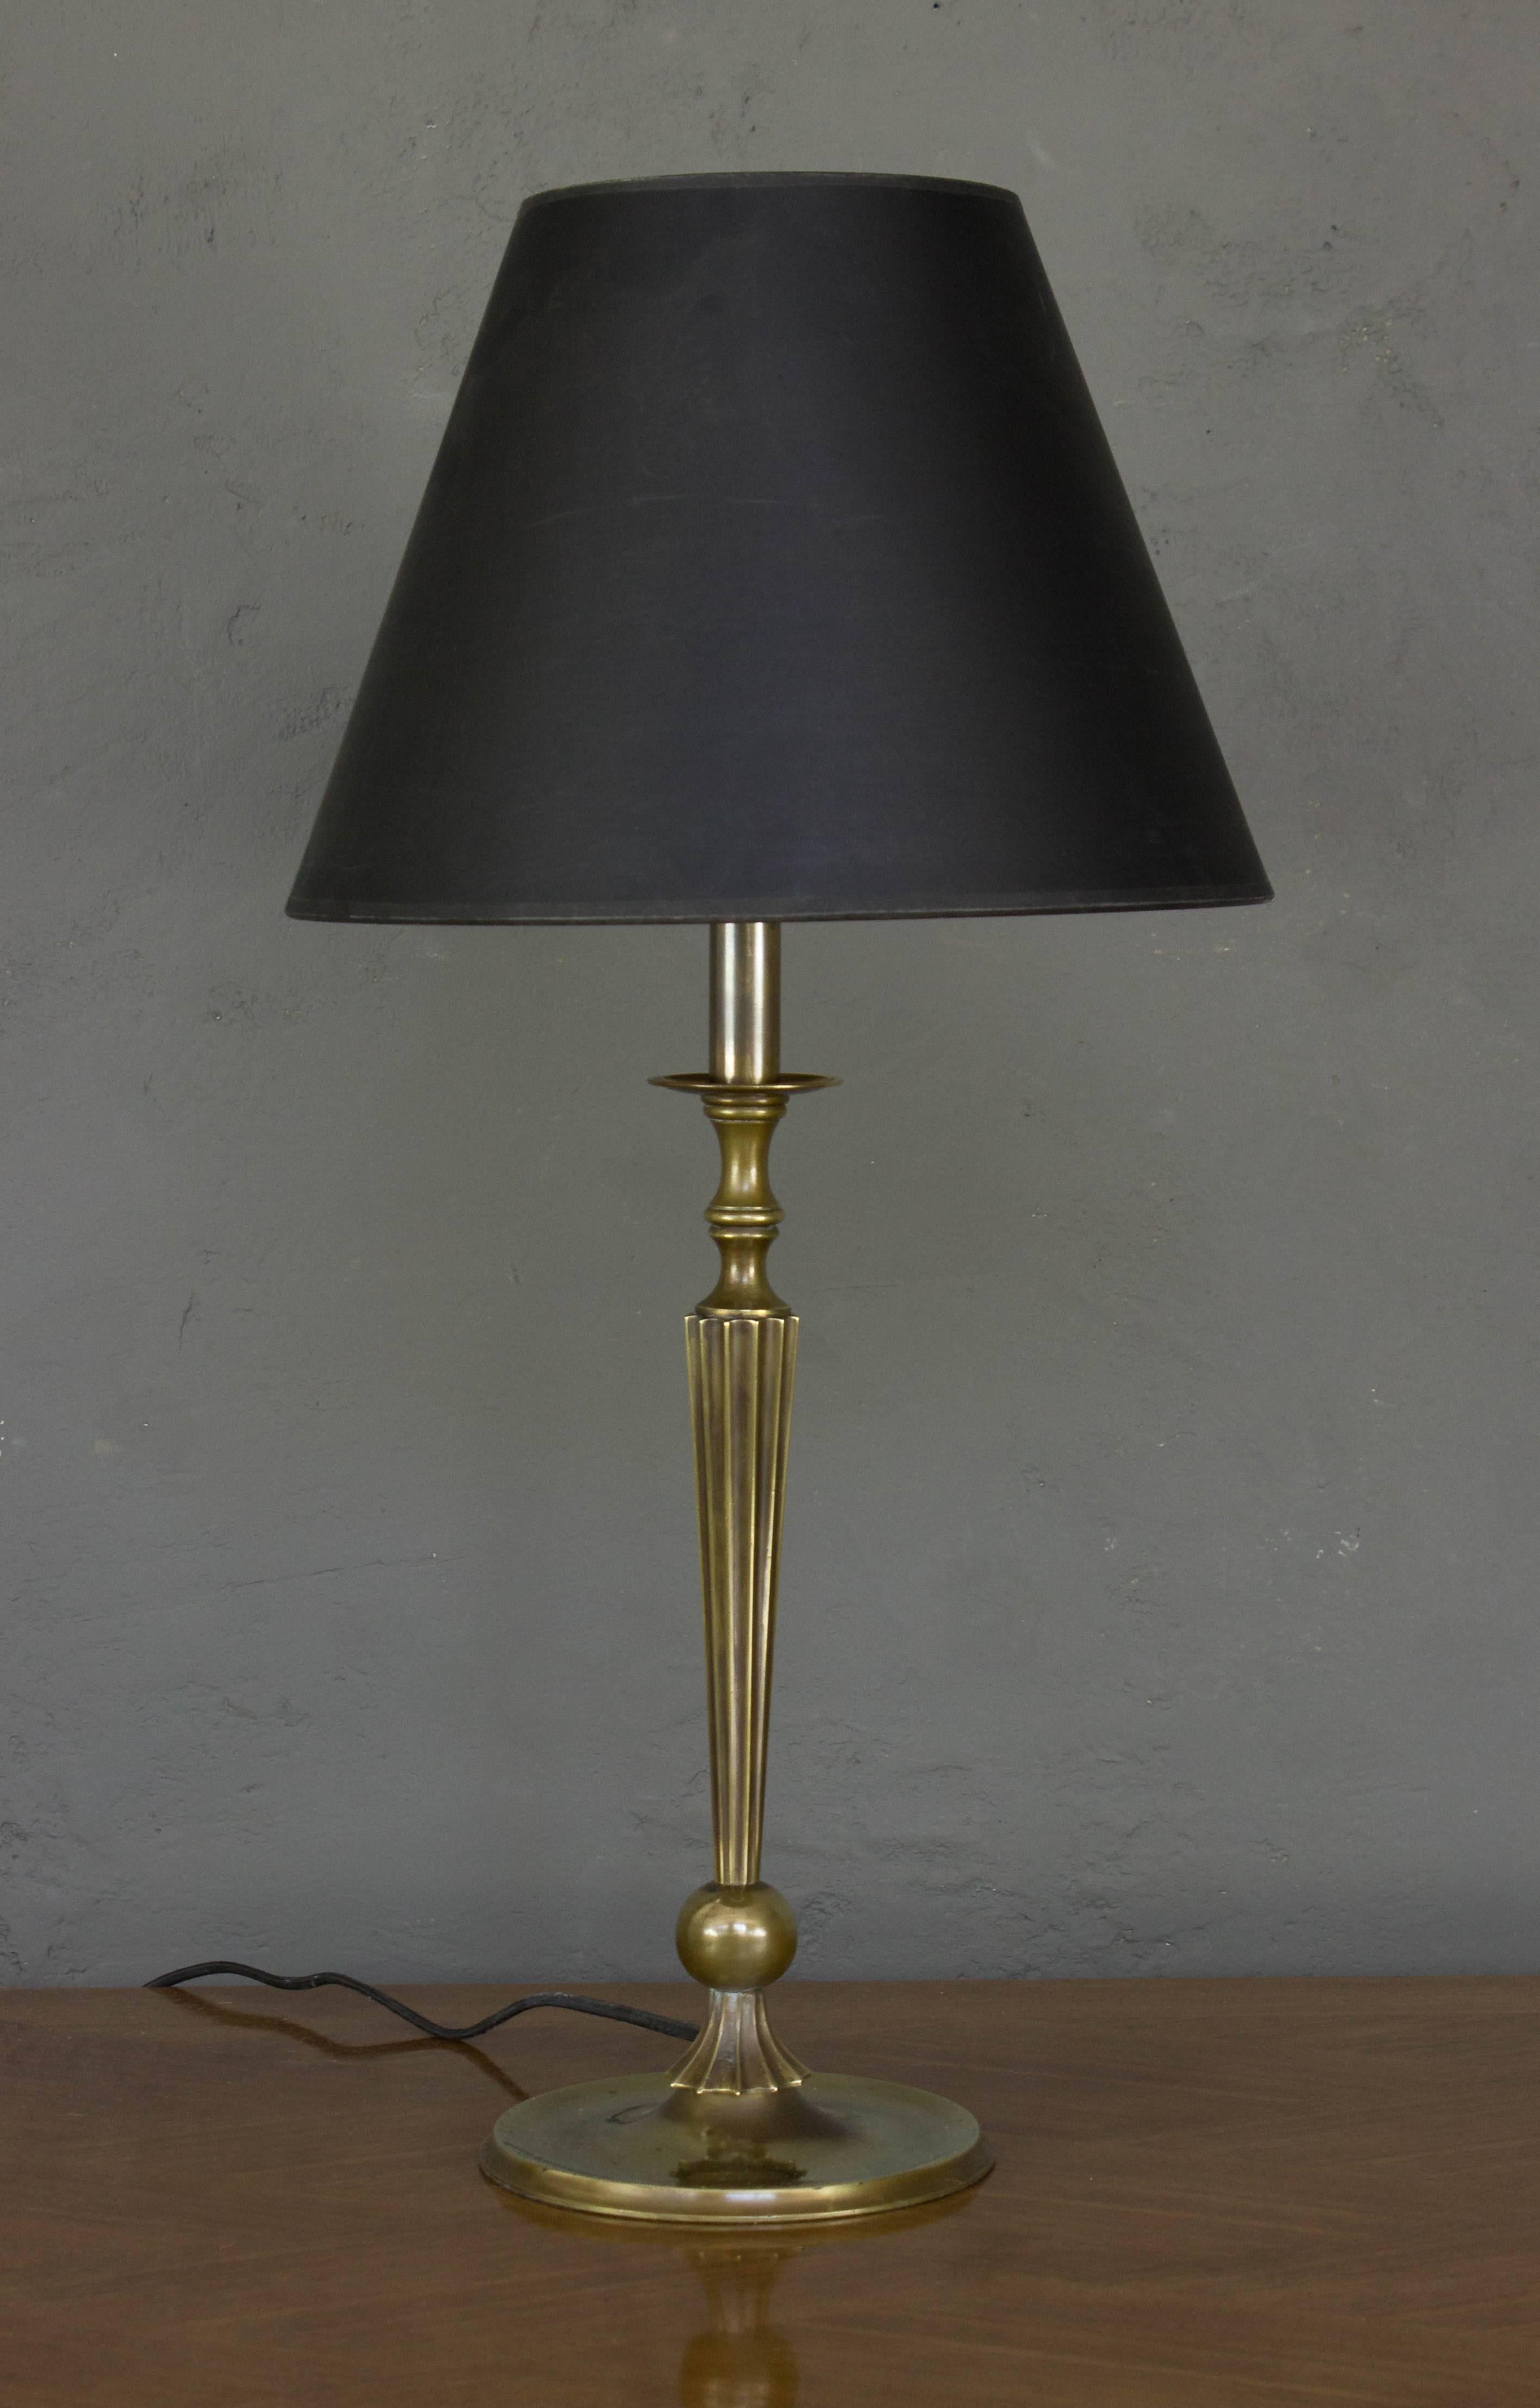 This pair of French 1940s brass table lamps embodies timeless elegance. These lamps feature fluted stems resting on ball and circular bases, showcasing exquisite craftsmanship from the era. Recently polished and rewired, they are in very good